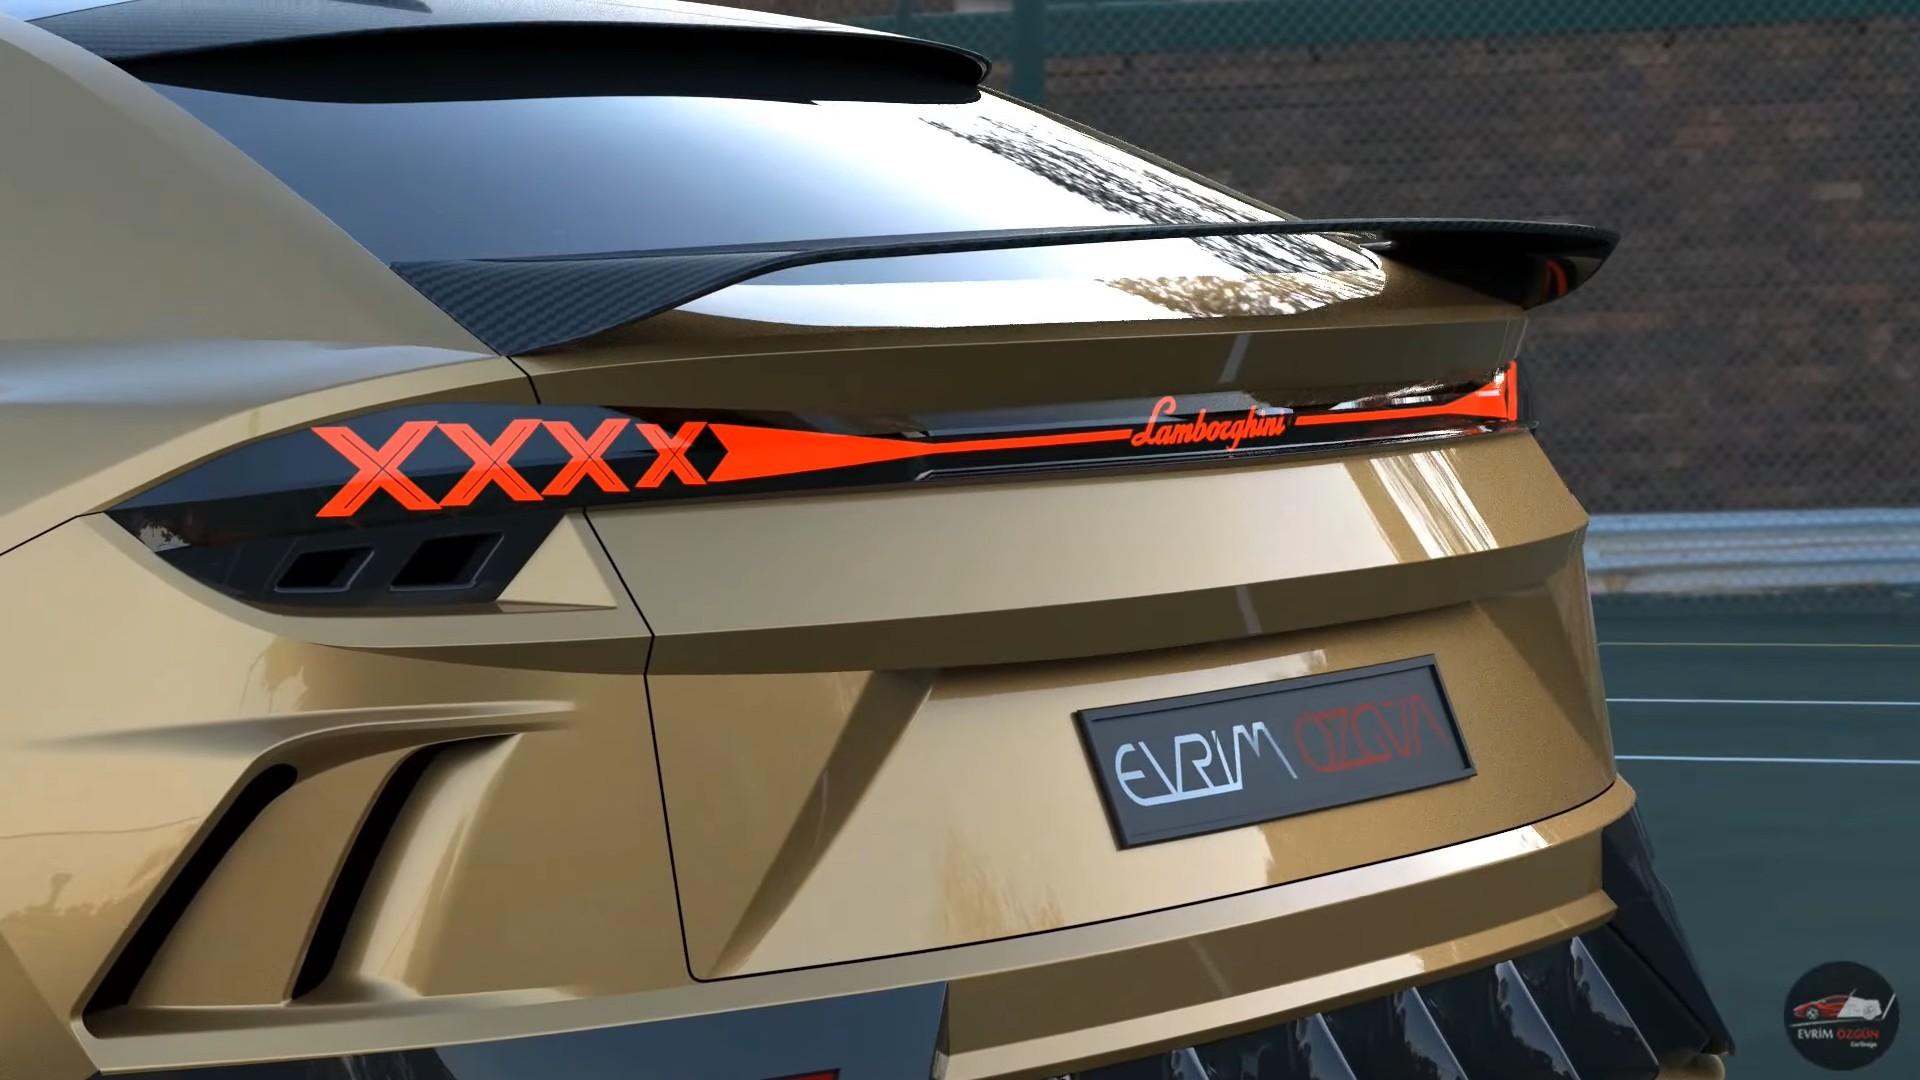 2024 Lambo Urus Has a Curious Case of Virtual Tuning, Looks Ready for the  Widebody Arena - autoevolution